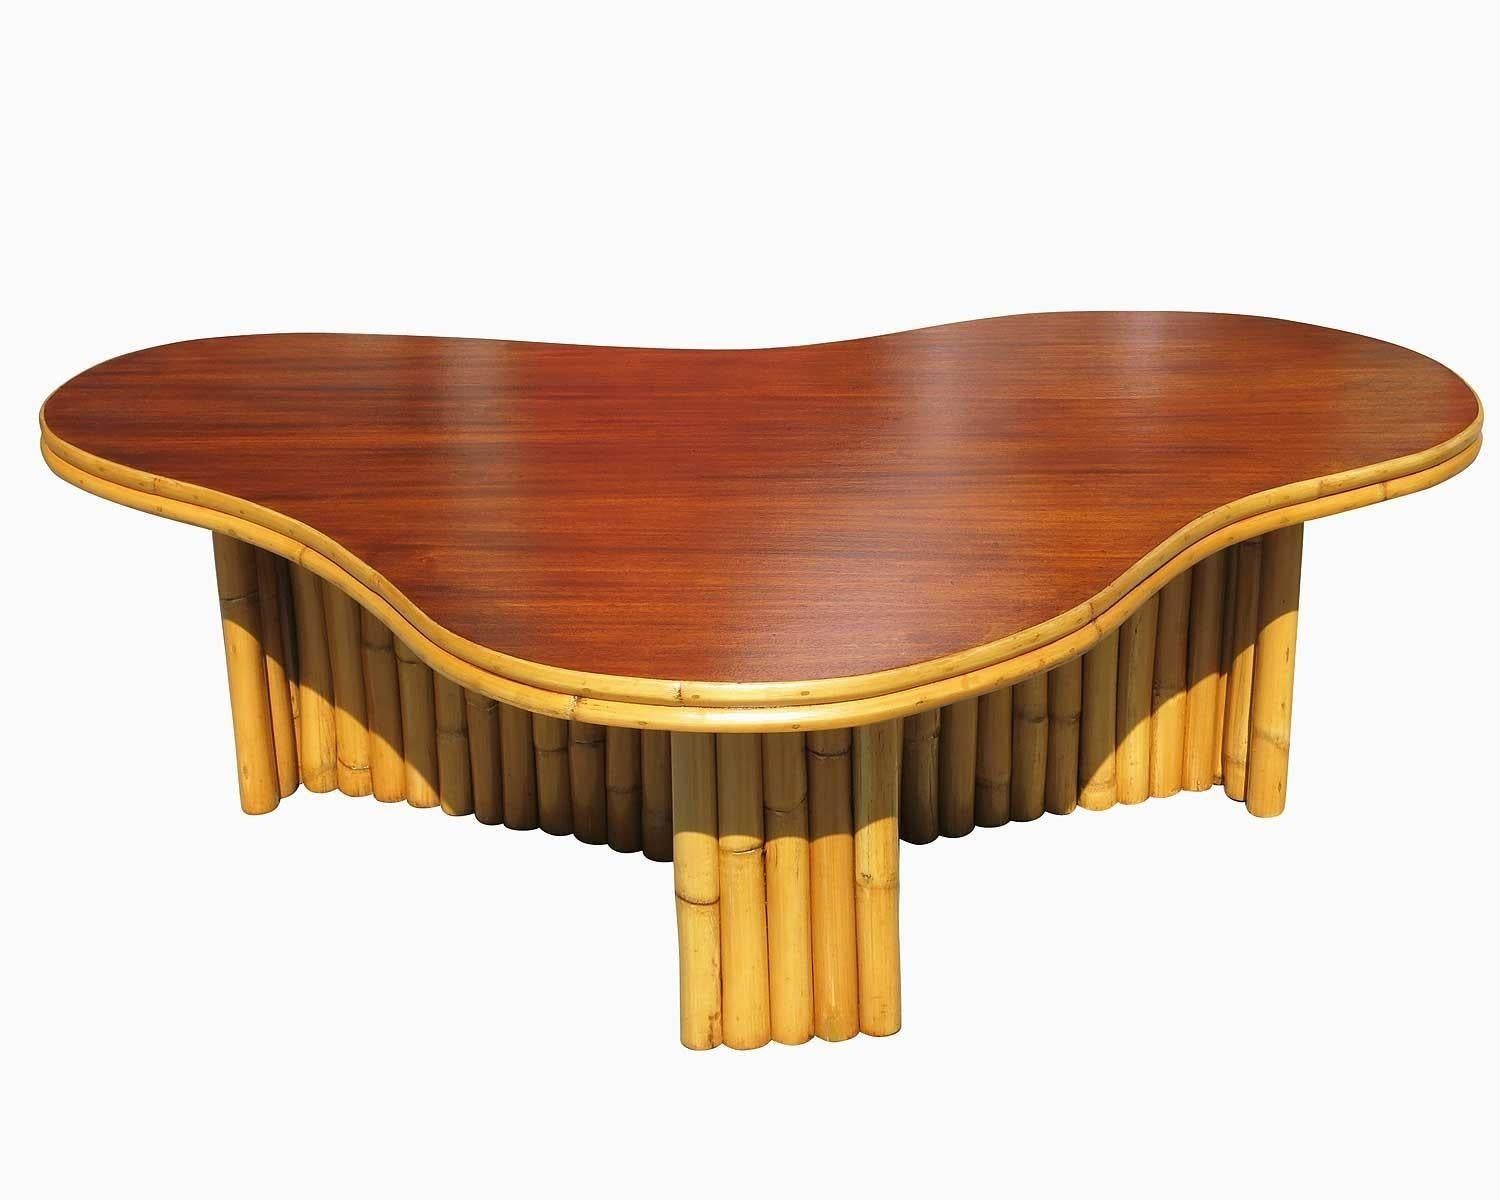 Biomorphic rattan coffee table with an amoeba shaped mahogany top, circa 1950. This table features a grouped pole leg design and stick rattan border along the top.

Refinished to new for you. All rattan, bamboo and wicker furniture has been